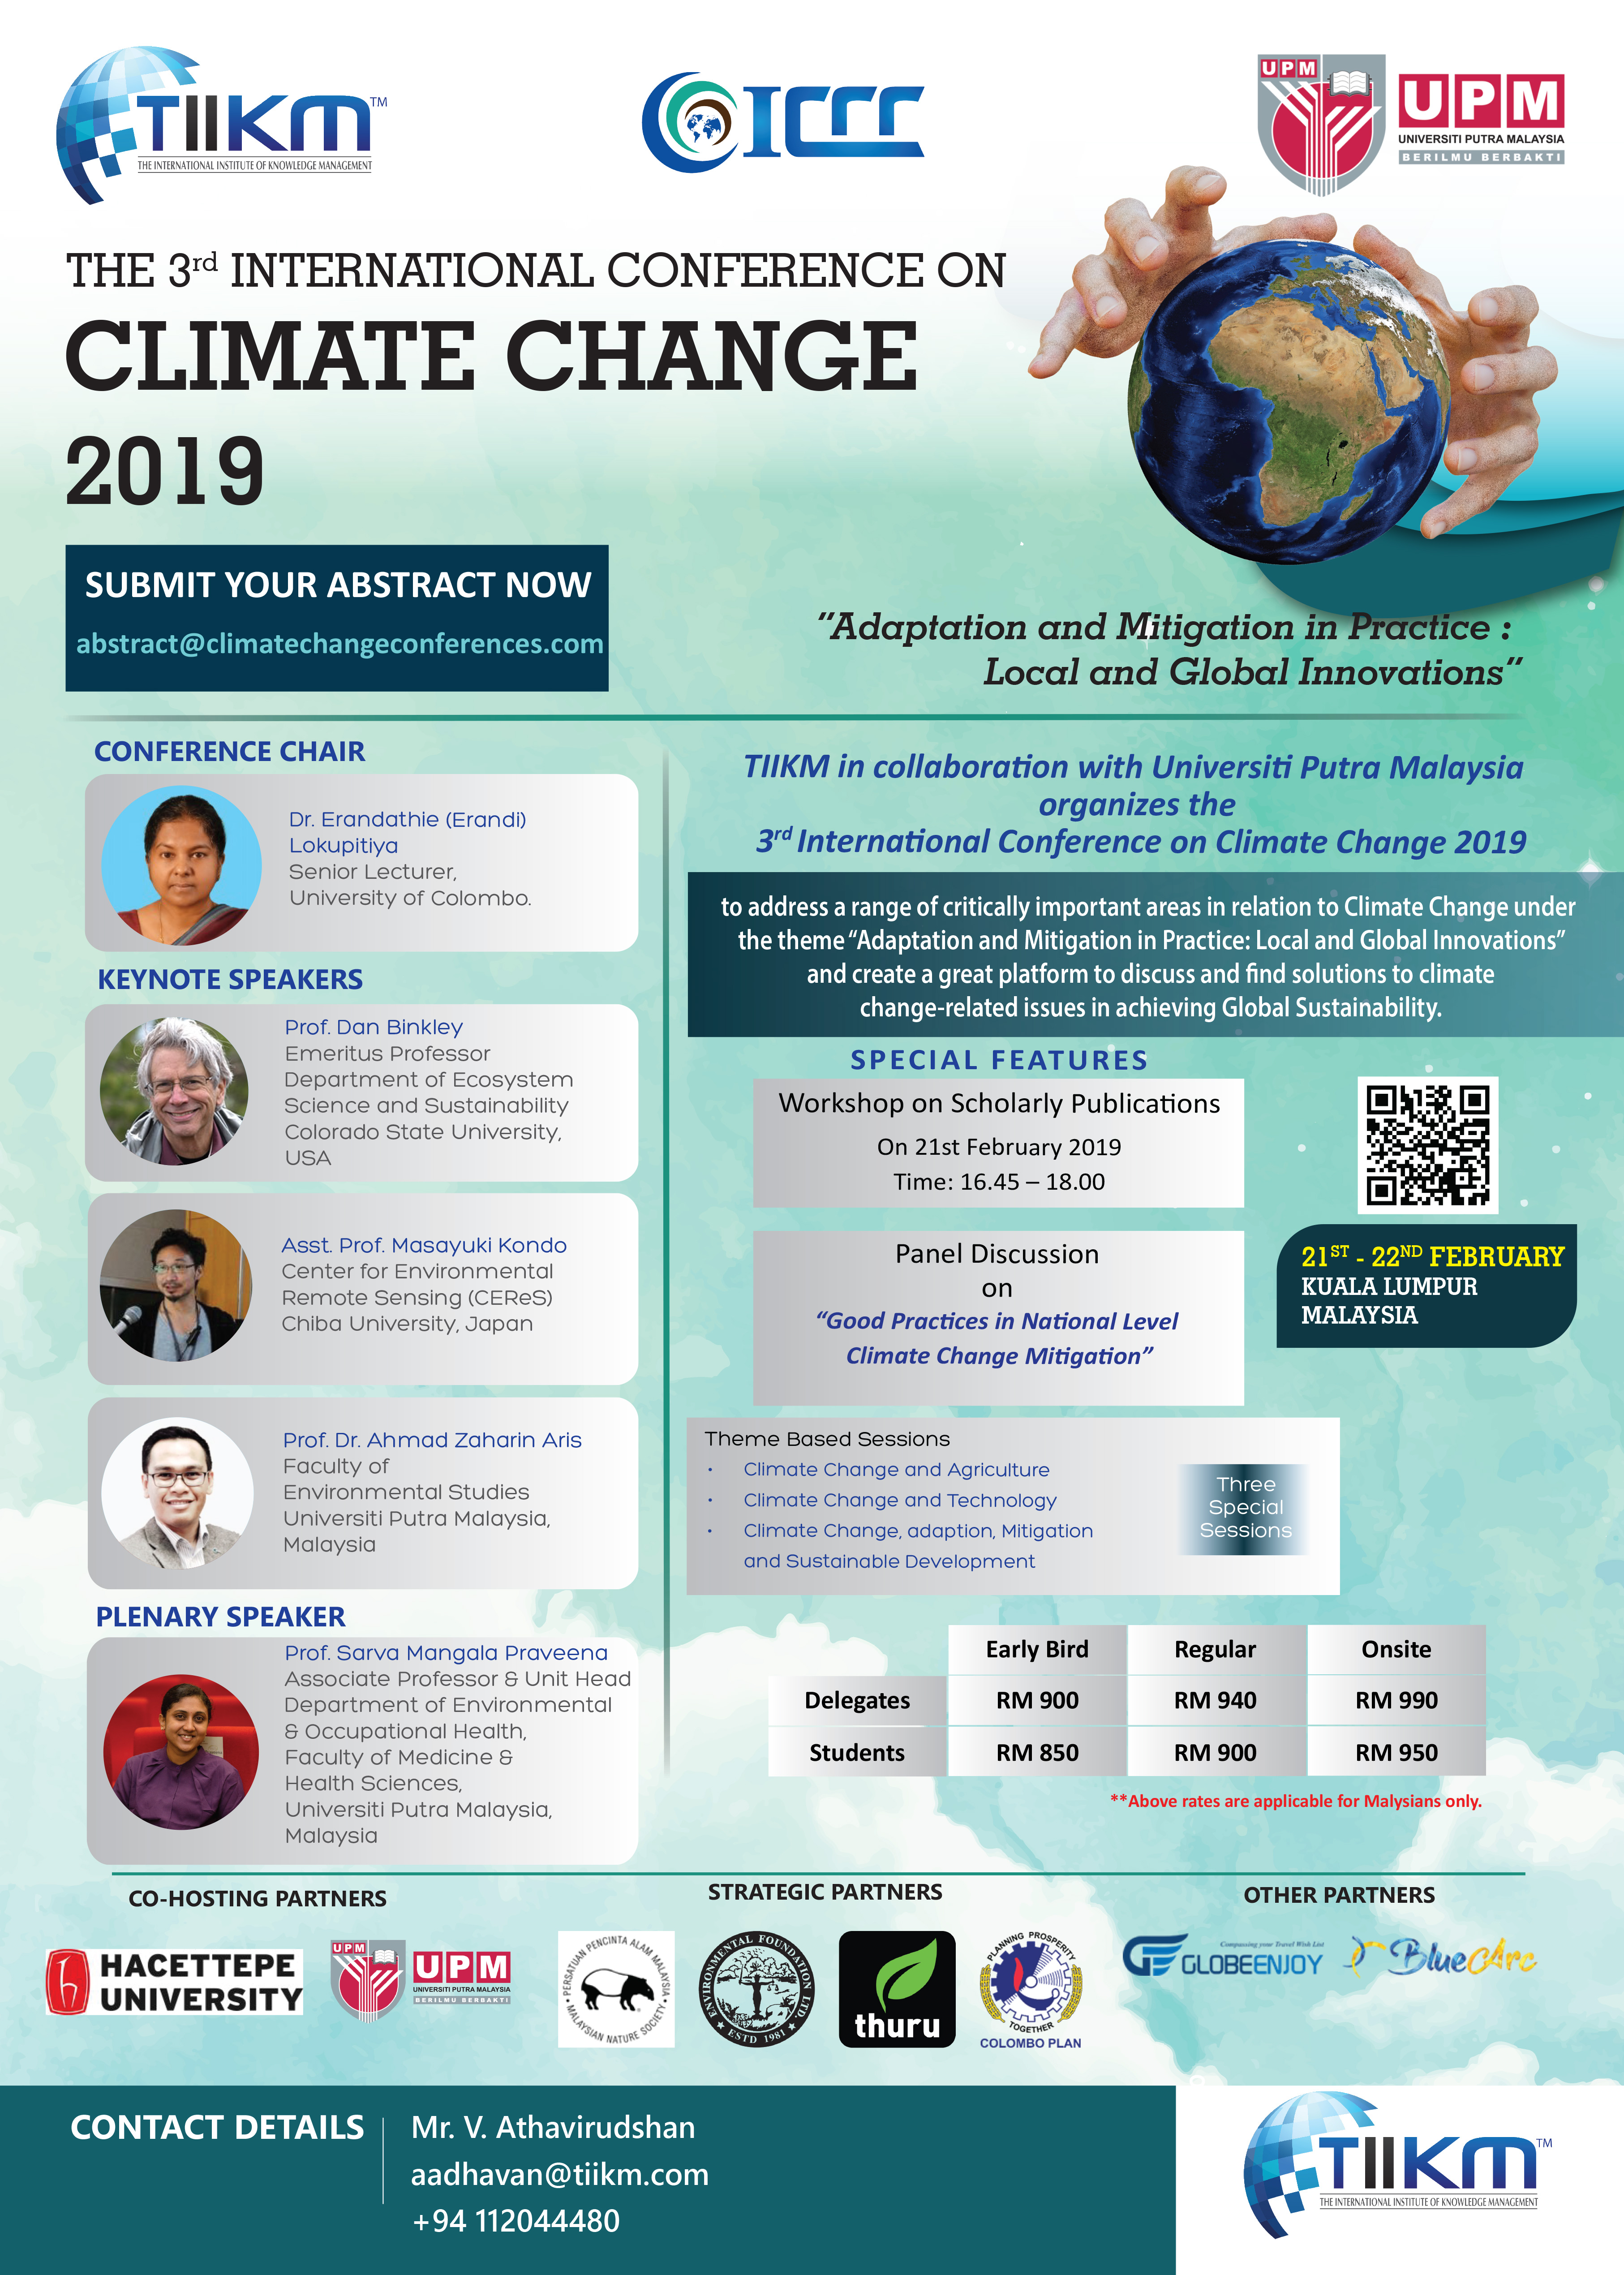 CALL FOR PAPERS 3rd International Conference on Climate Change 2019 (ICCC 2019)